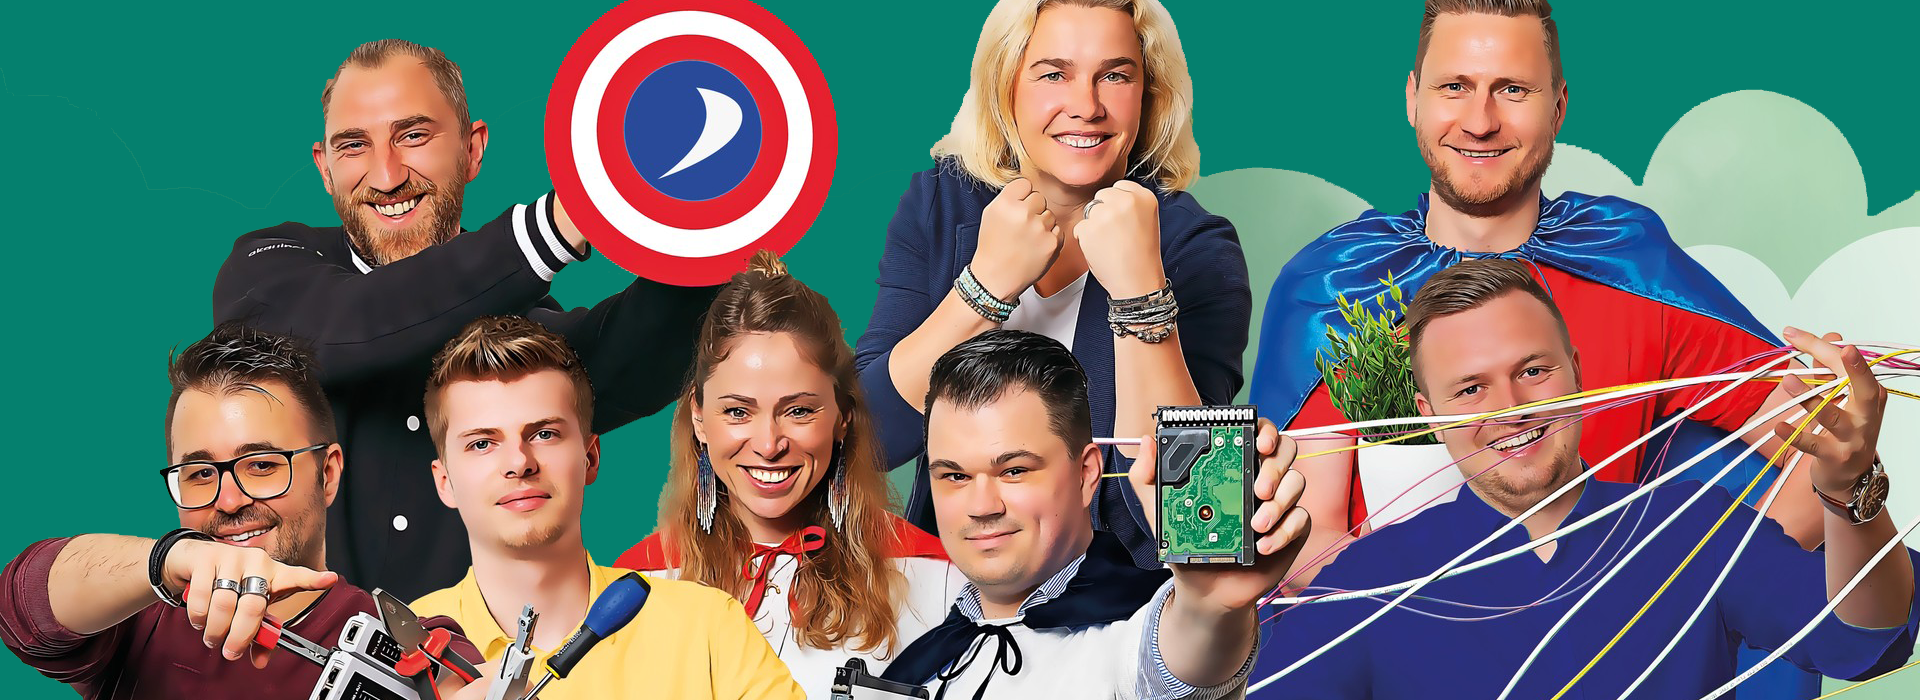 AKQUINET Cloud employees as superheroes in a team picture.